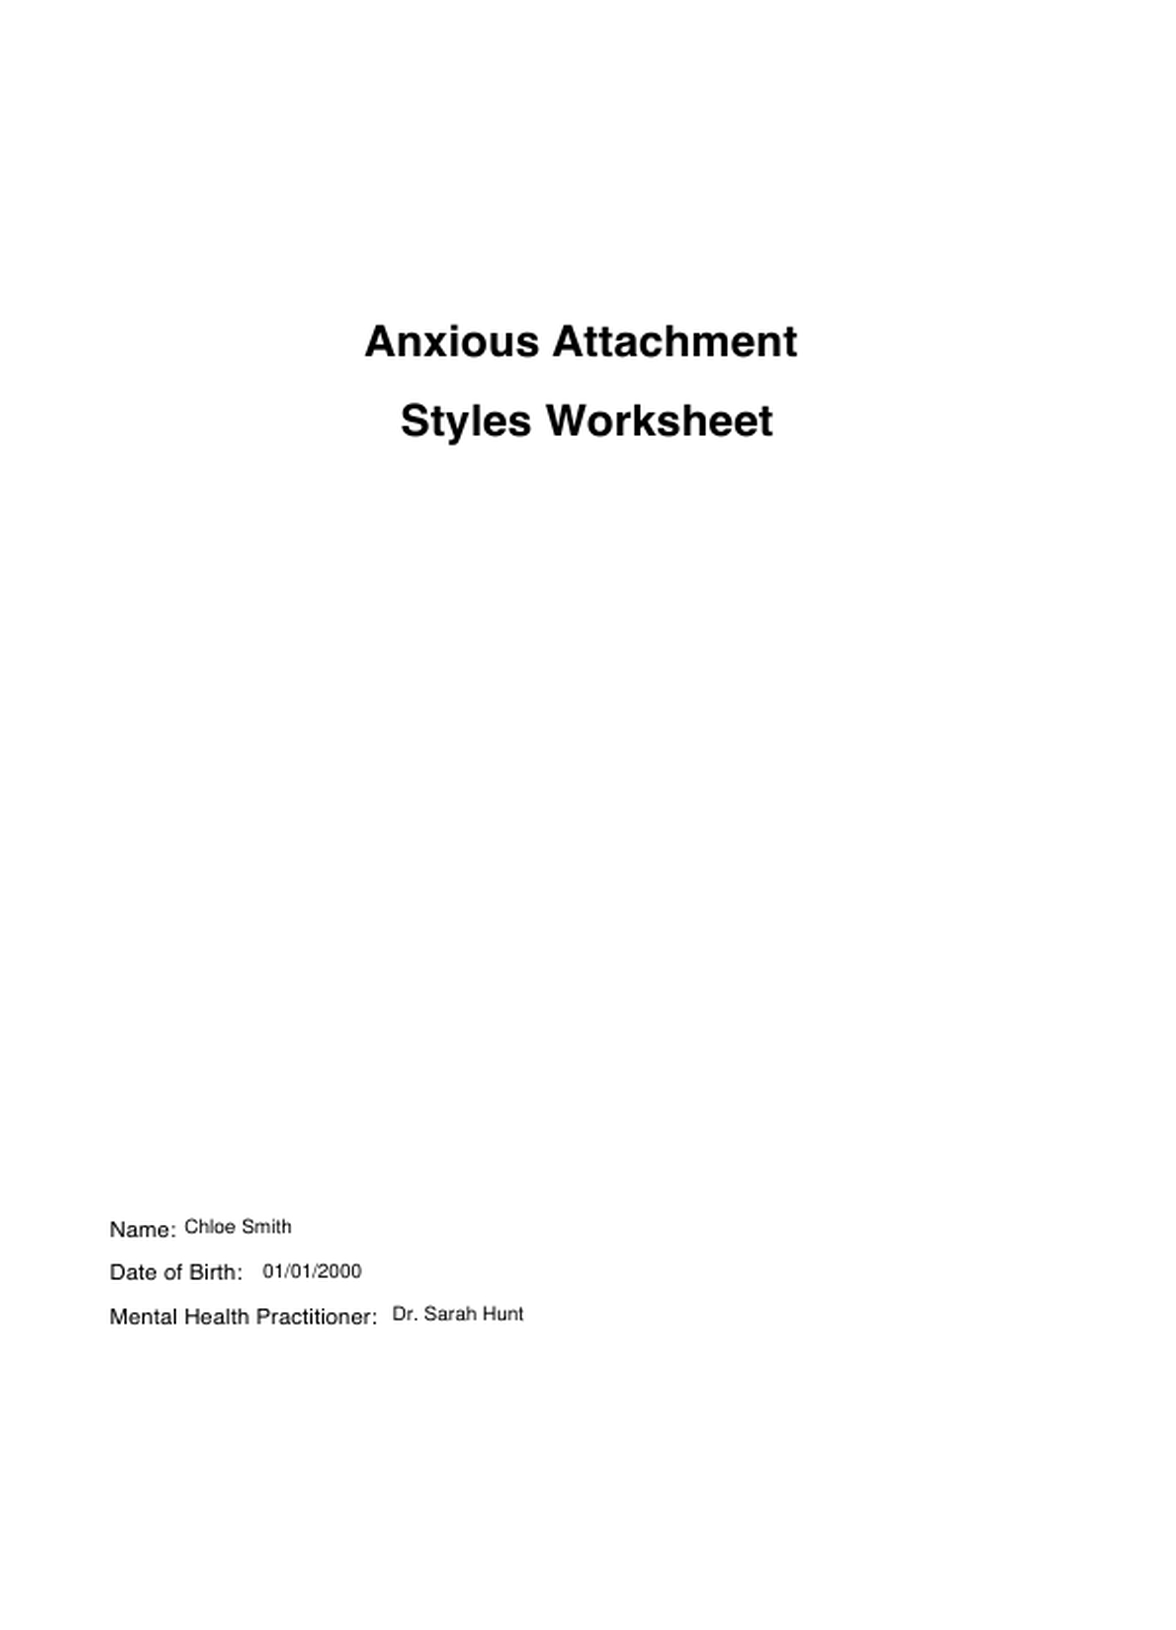 Anxious Attachment Style Workbook PDF Example